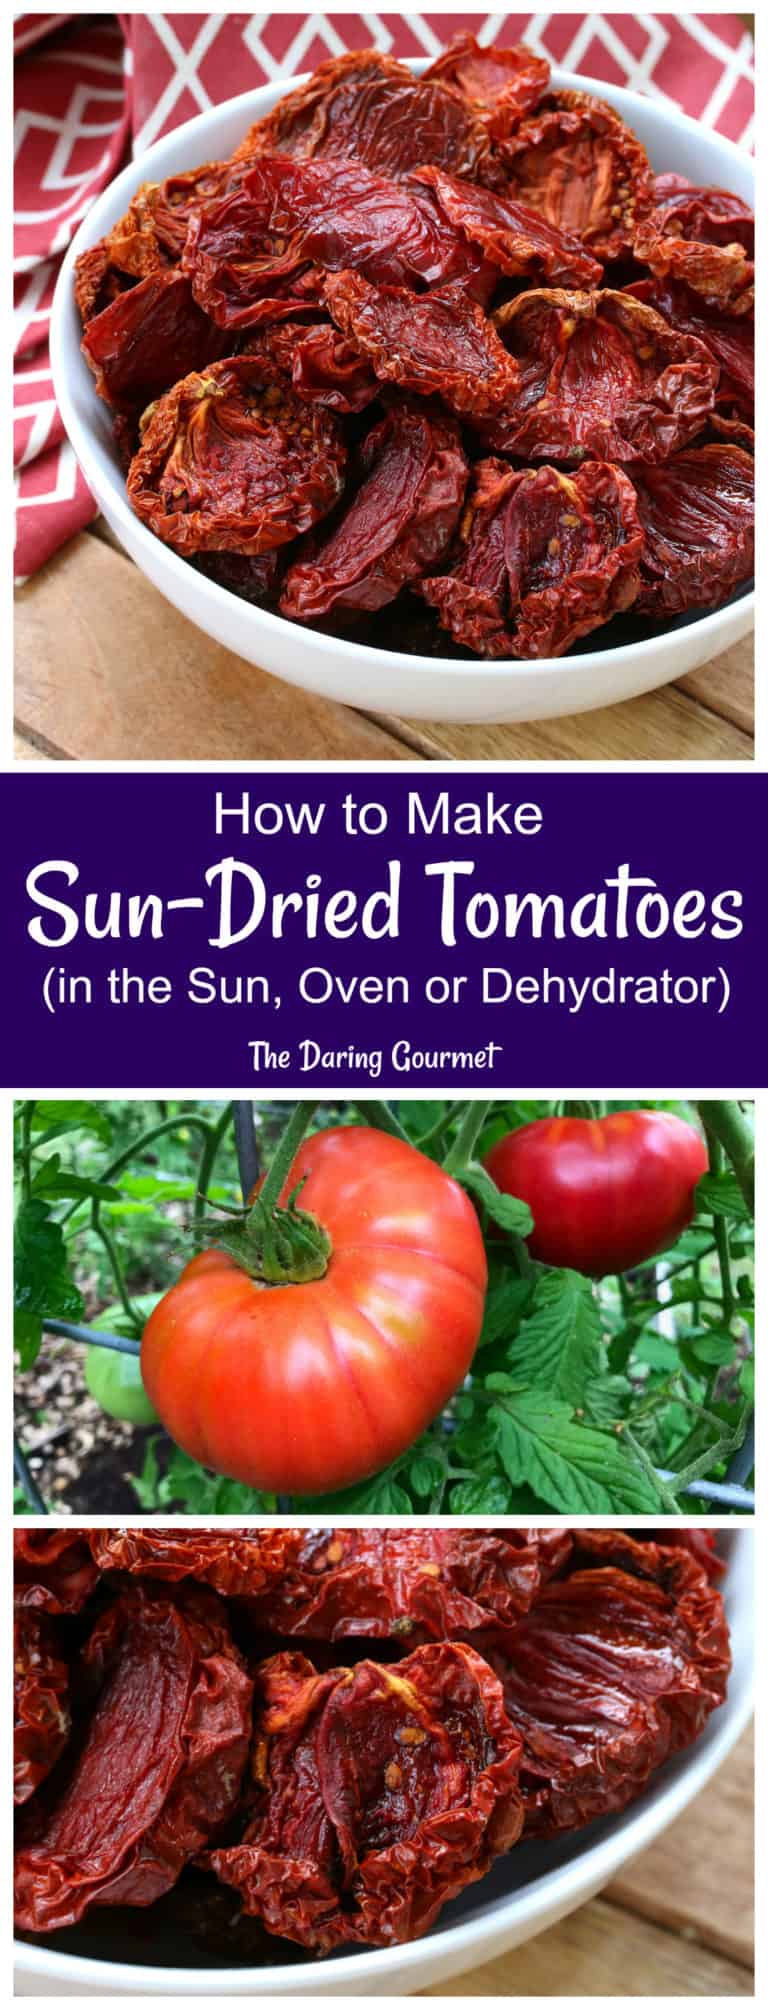 how to make sun dried tomatoes recipe easy oven dehydrator